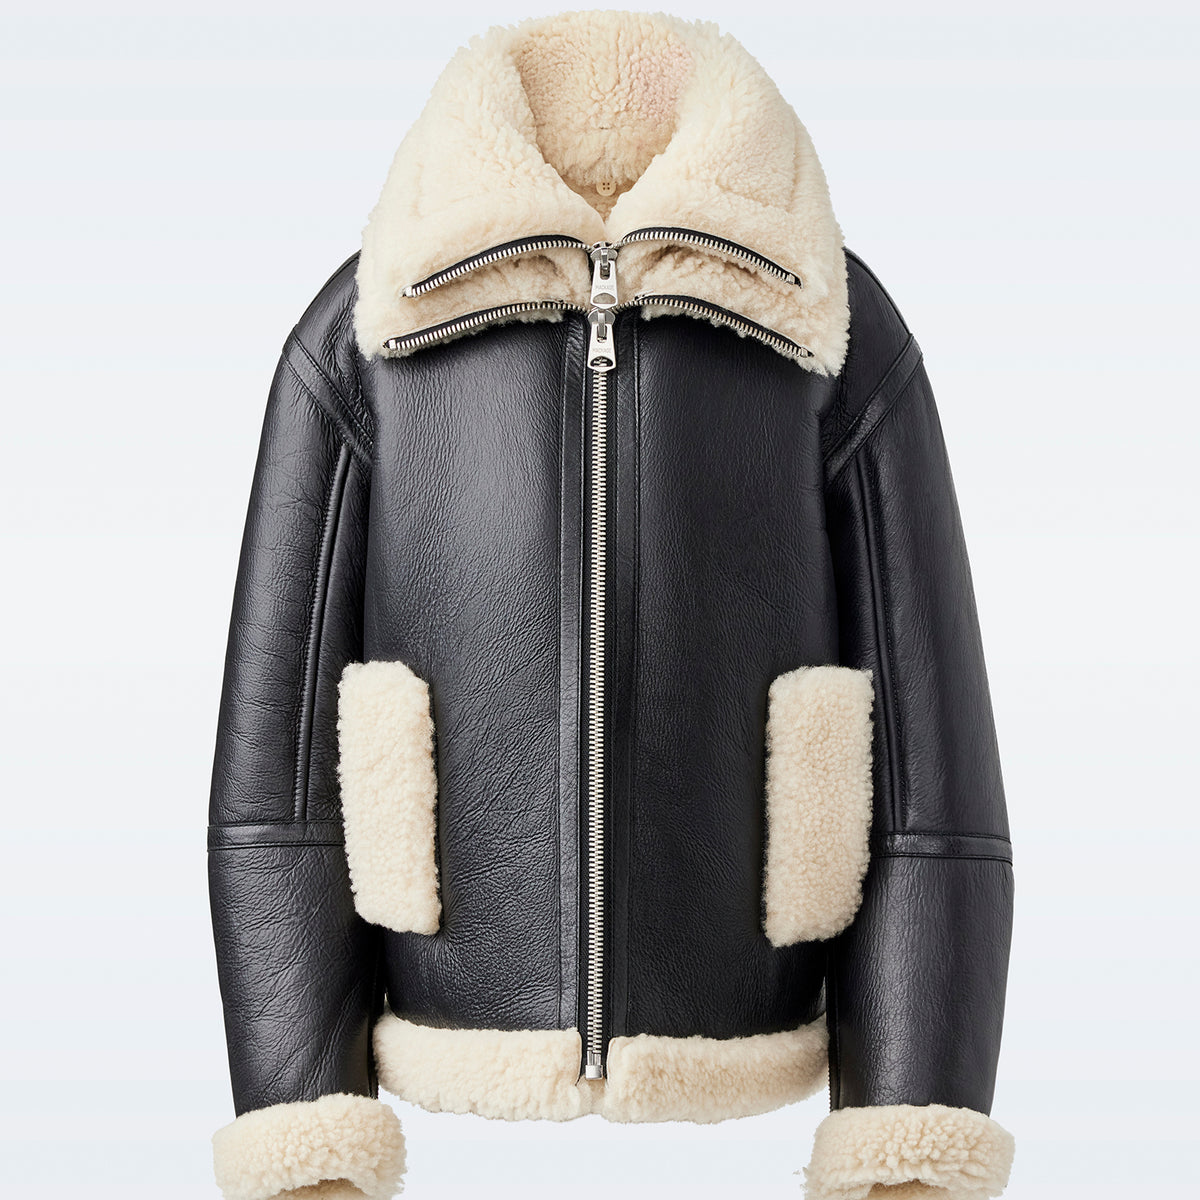 Calan, Sheepskin bomber jacket with removable collar for kids (8 